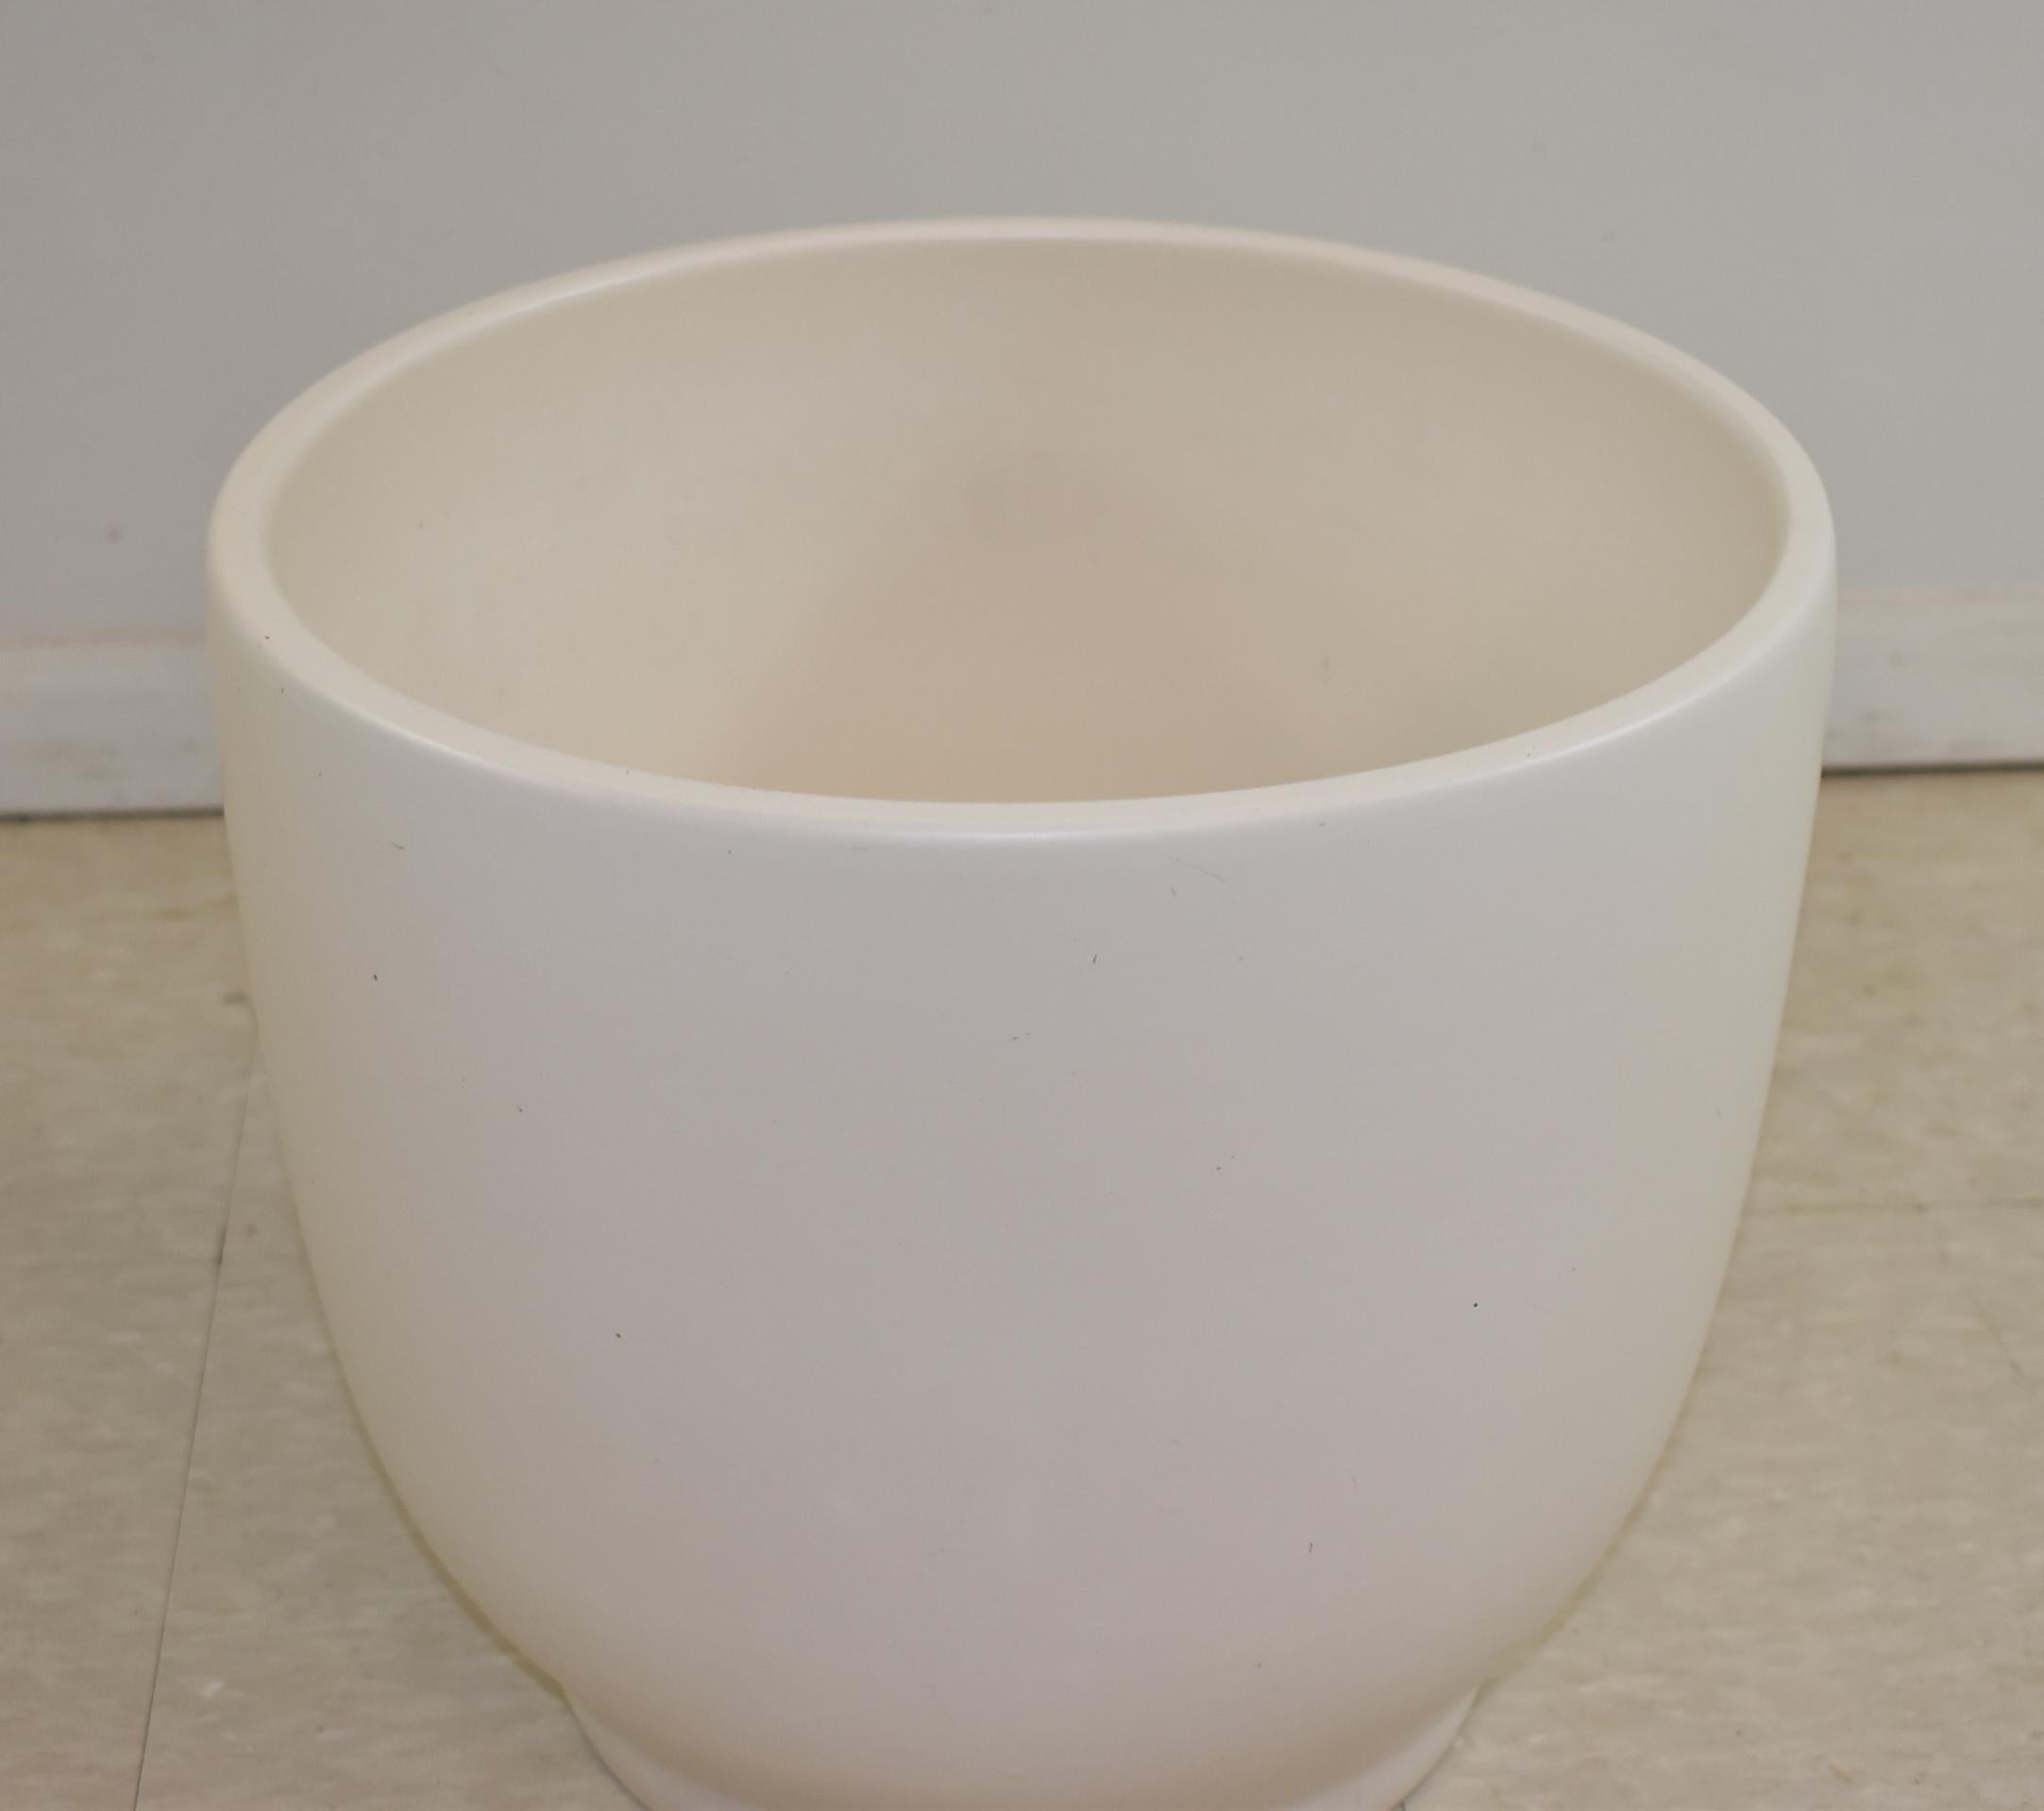 Vintage cream pottery footed planter made in the U.S.A.